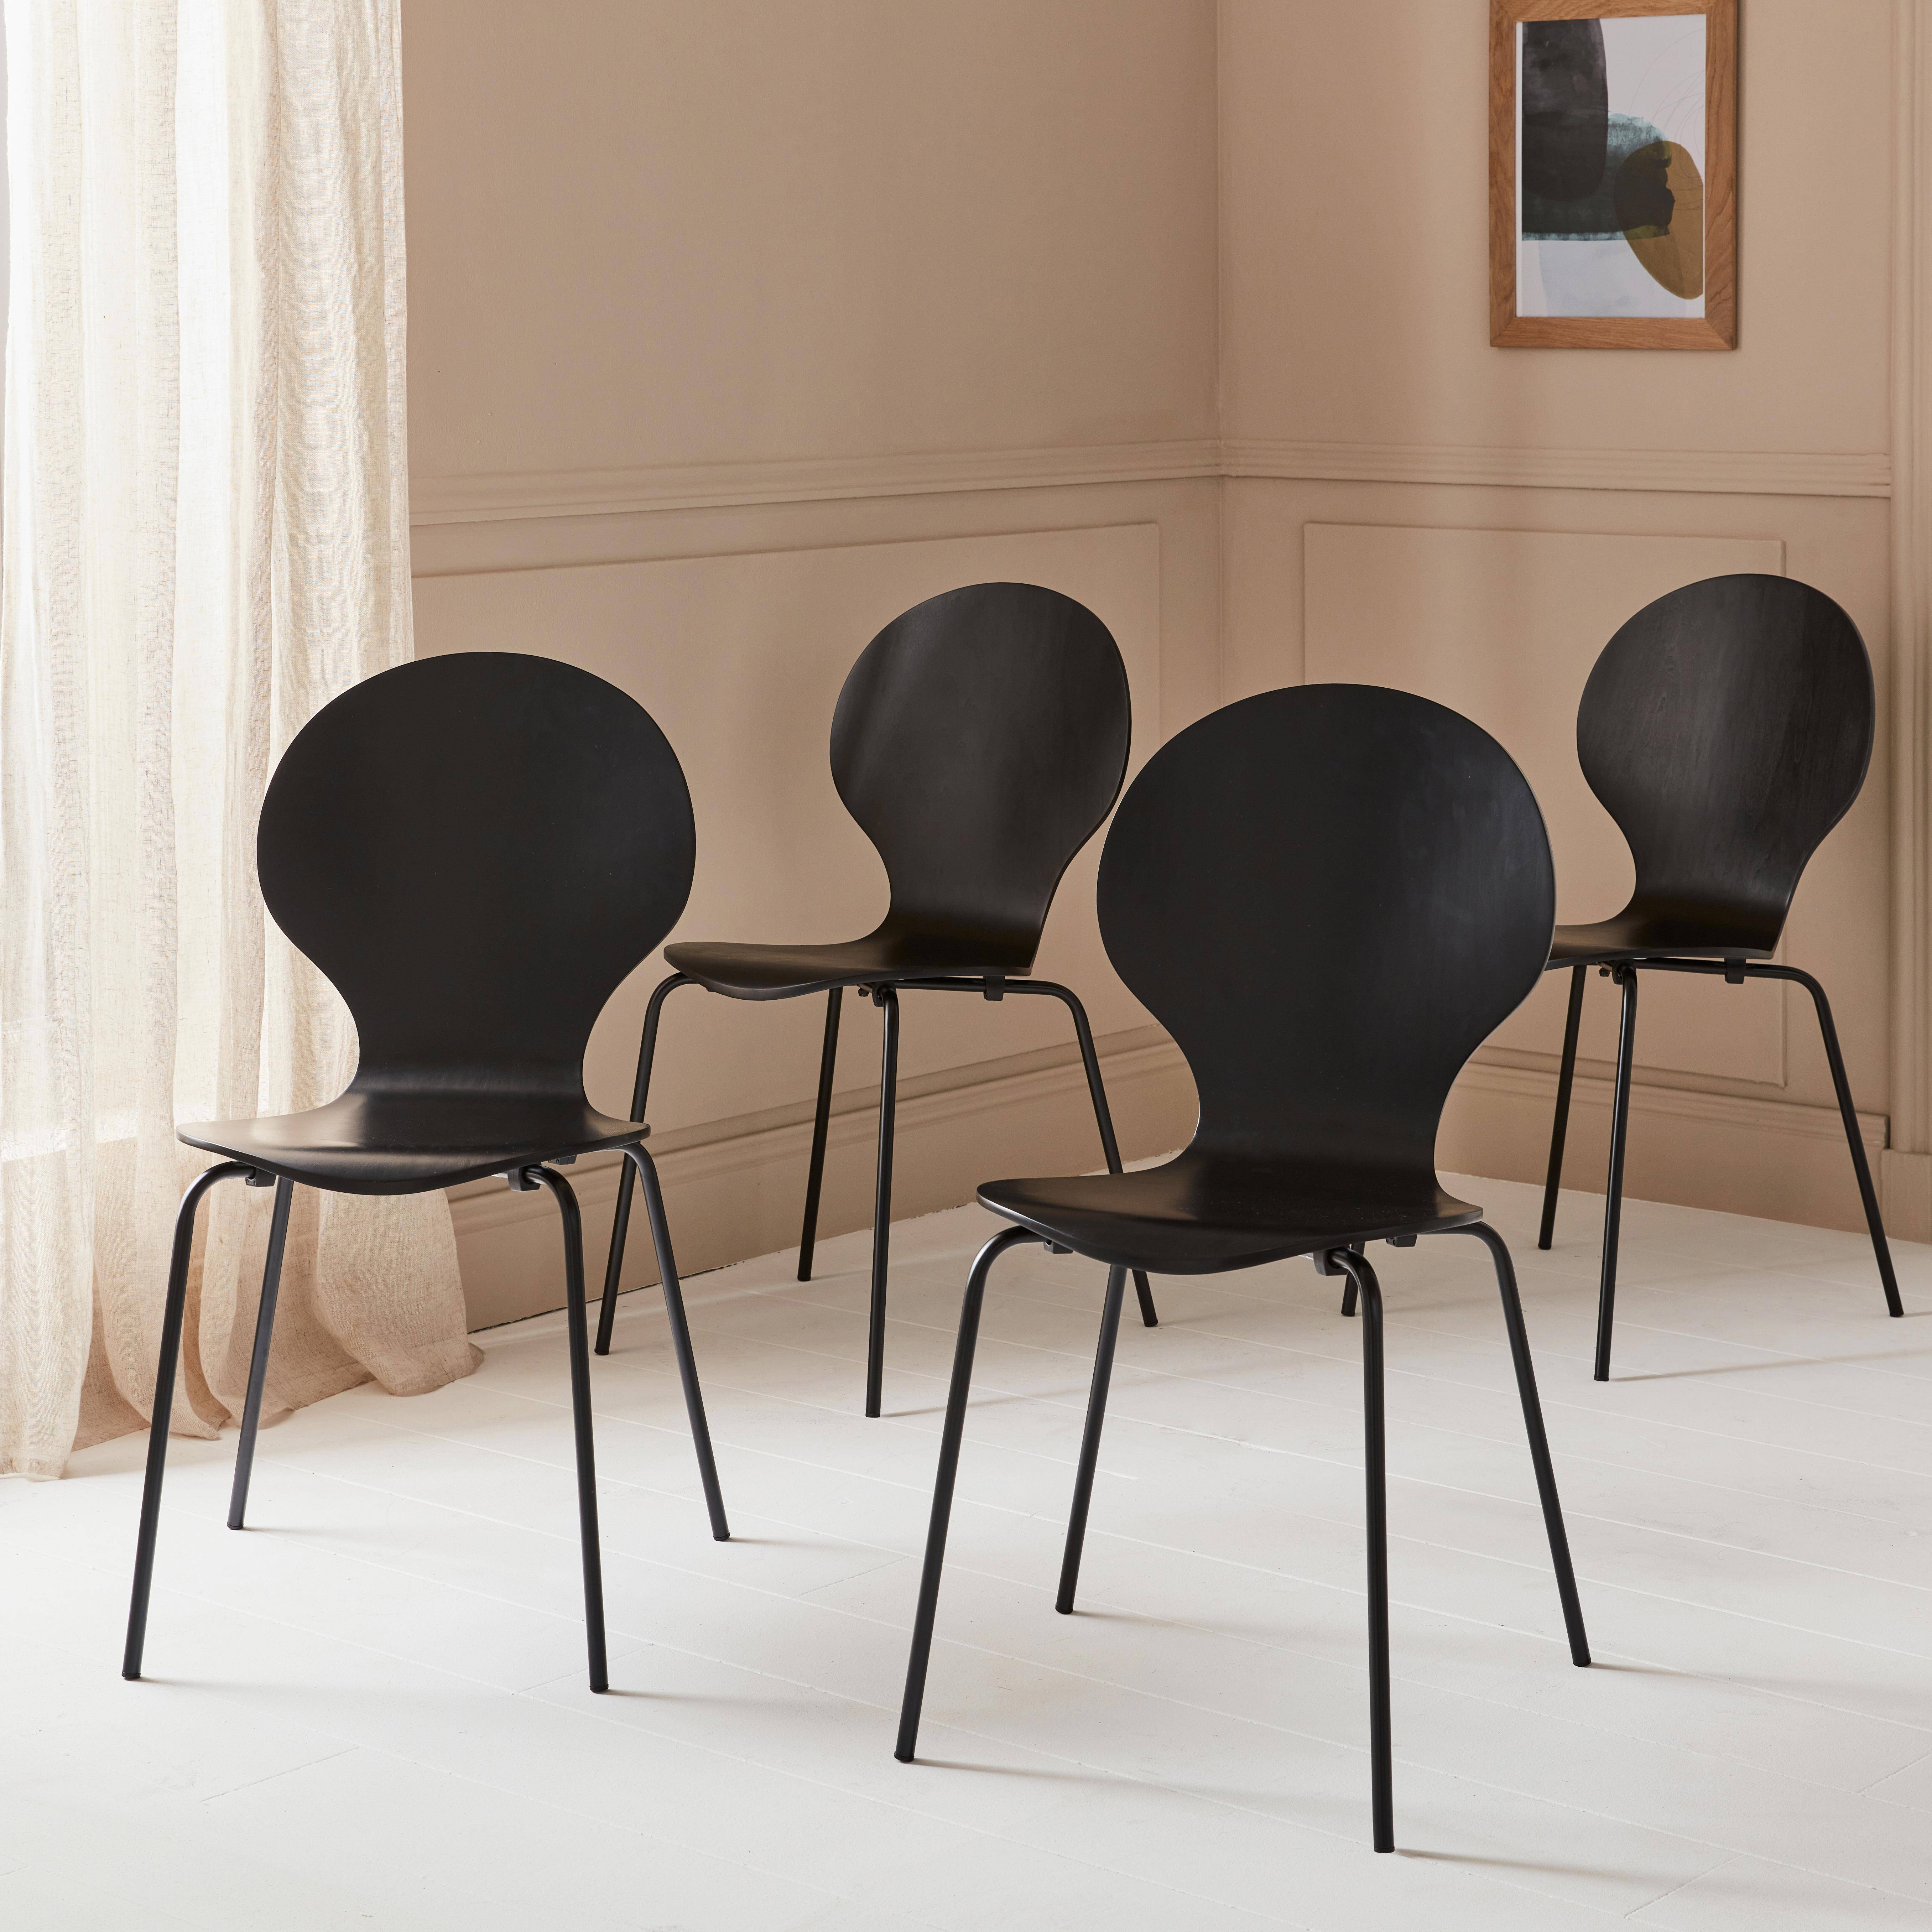 Set of 4 stackable Retro Chairs, Wood and Plywood, black,  L43 x W48 x H87cm,sweeek,Photo2